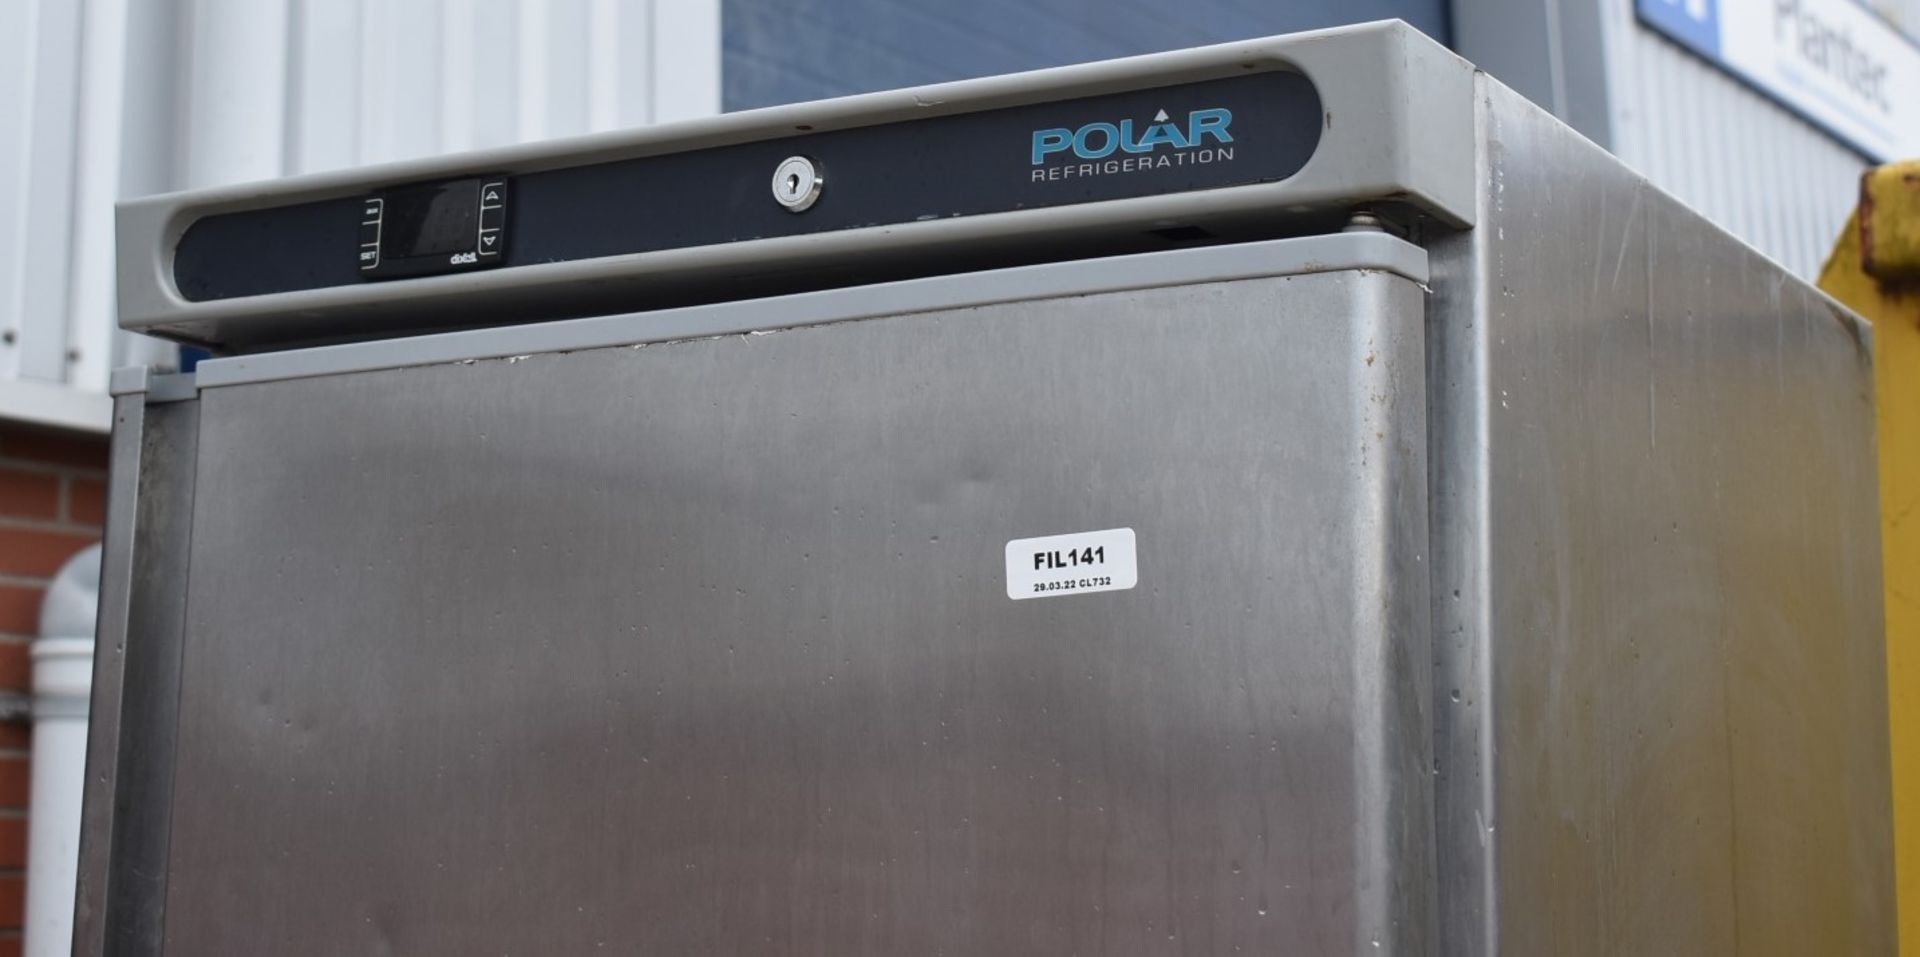 1 x Polar CD083 Upright Freezer With Stainless Steel Exterior - Dimensions: H185 x W60 x D60 cms - Image 3 of 10